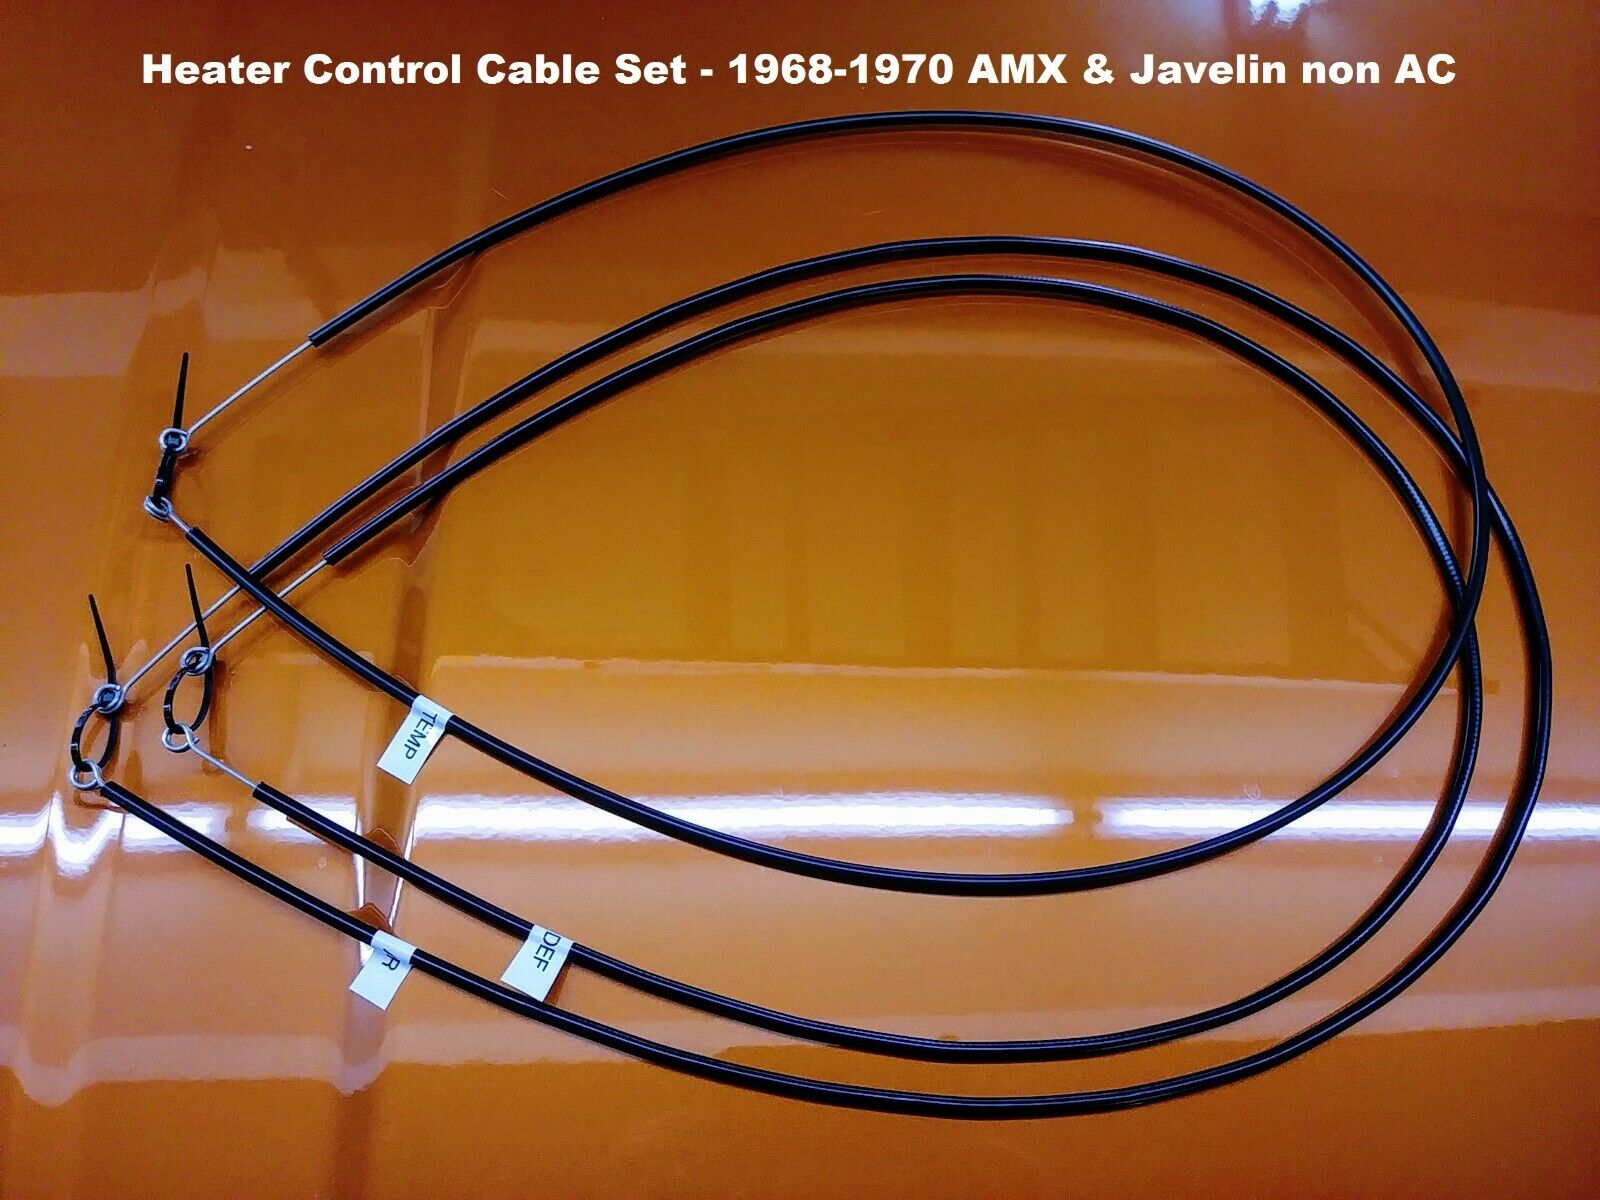 1968-70 AMC AMX & Javelin Heater Control Cable Set, for non-AC cars